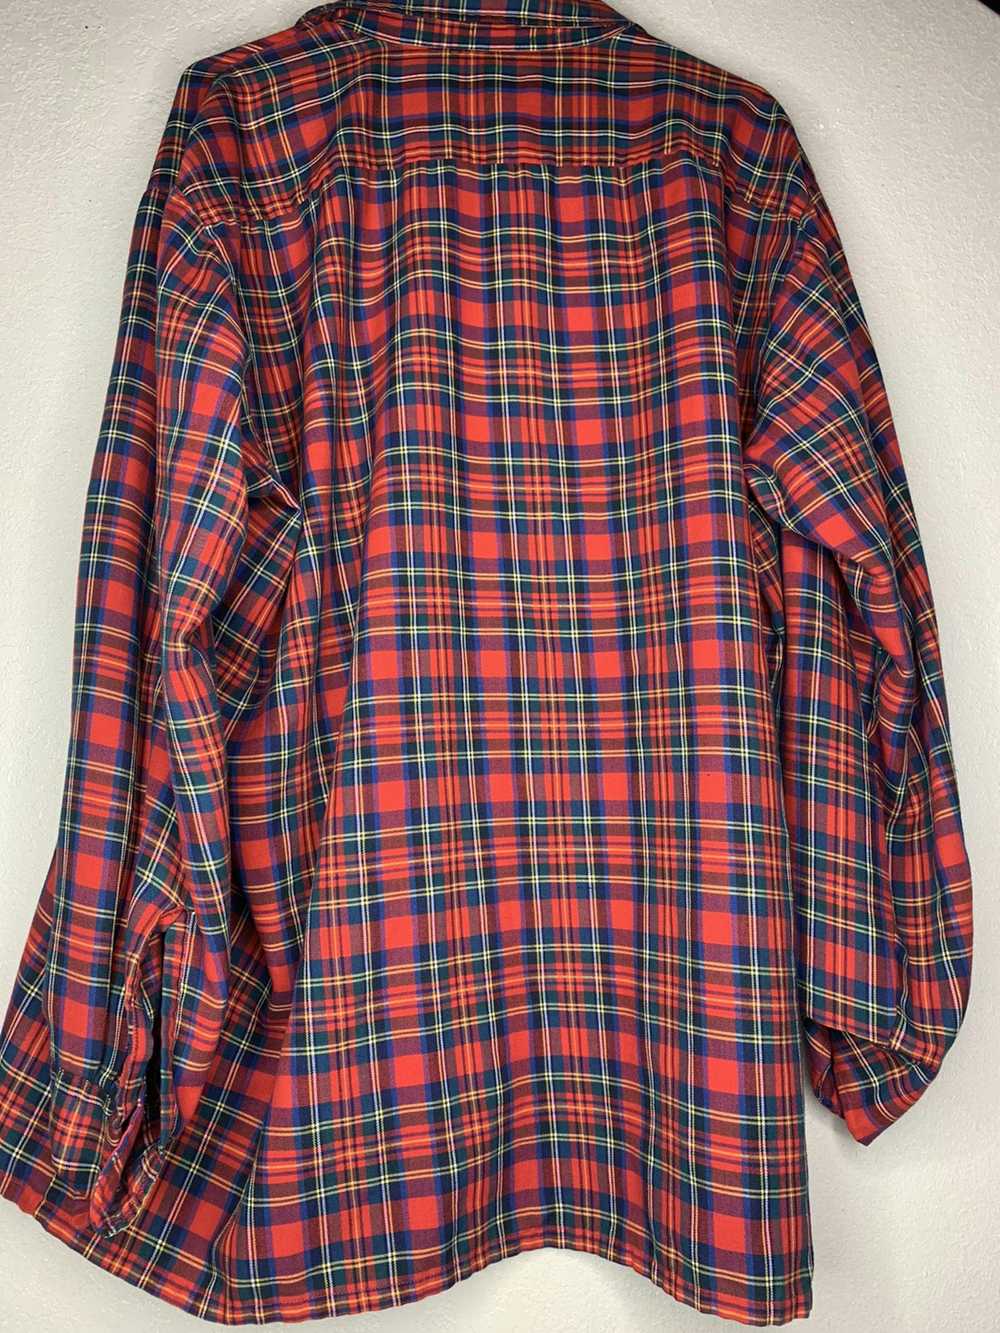 Solid and Striped **Like New** Plaid Button Down … - image 2